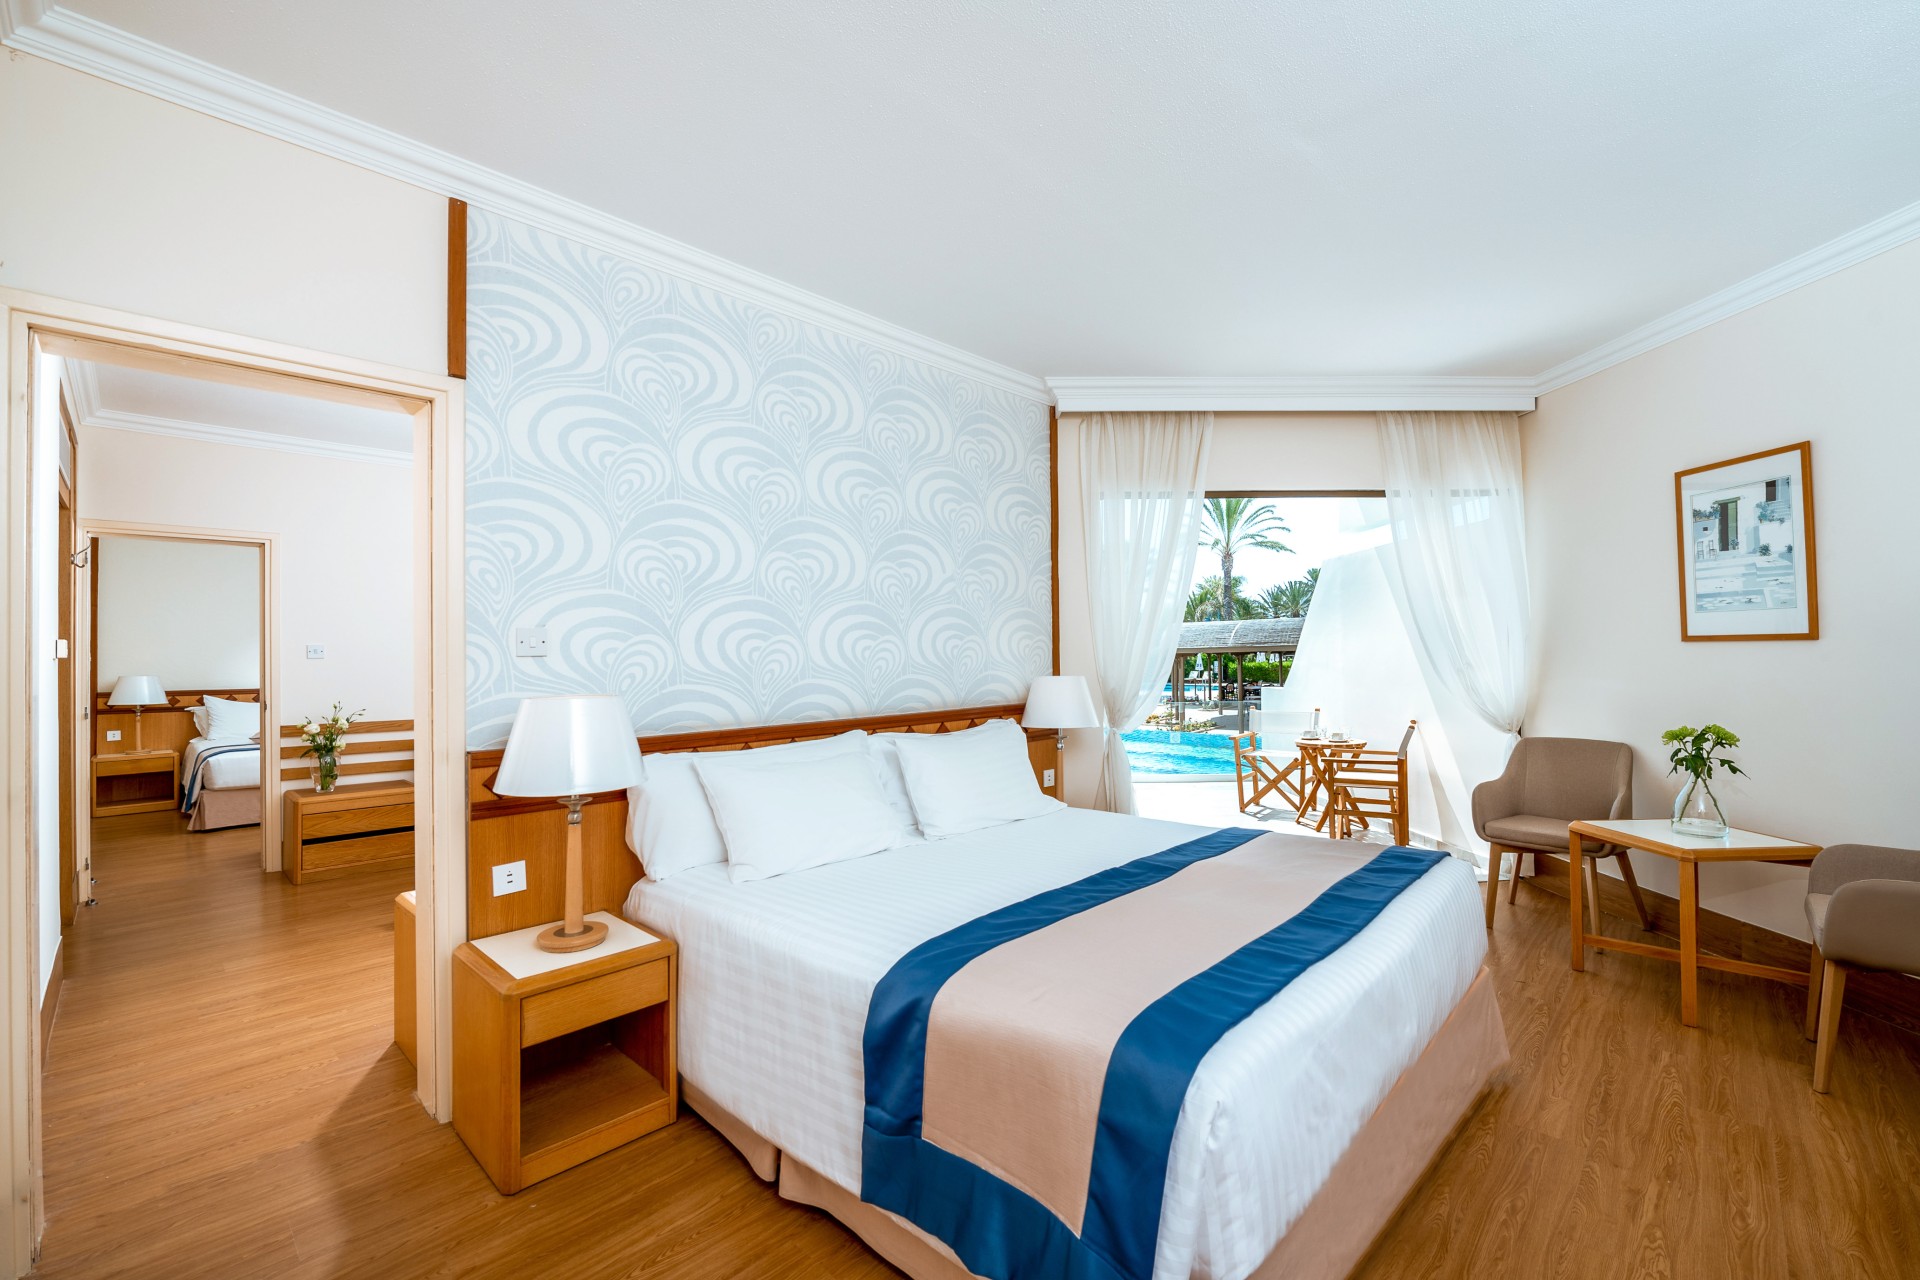 46 ATHENA BEACH HOTEL FAMILY SUPERIOR INTERCONNECTING AND TRIPLE INTERCONECTING SWIM-UP ROOM